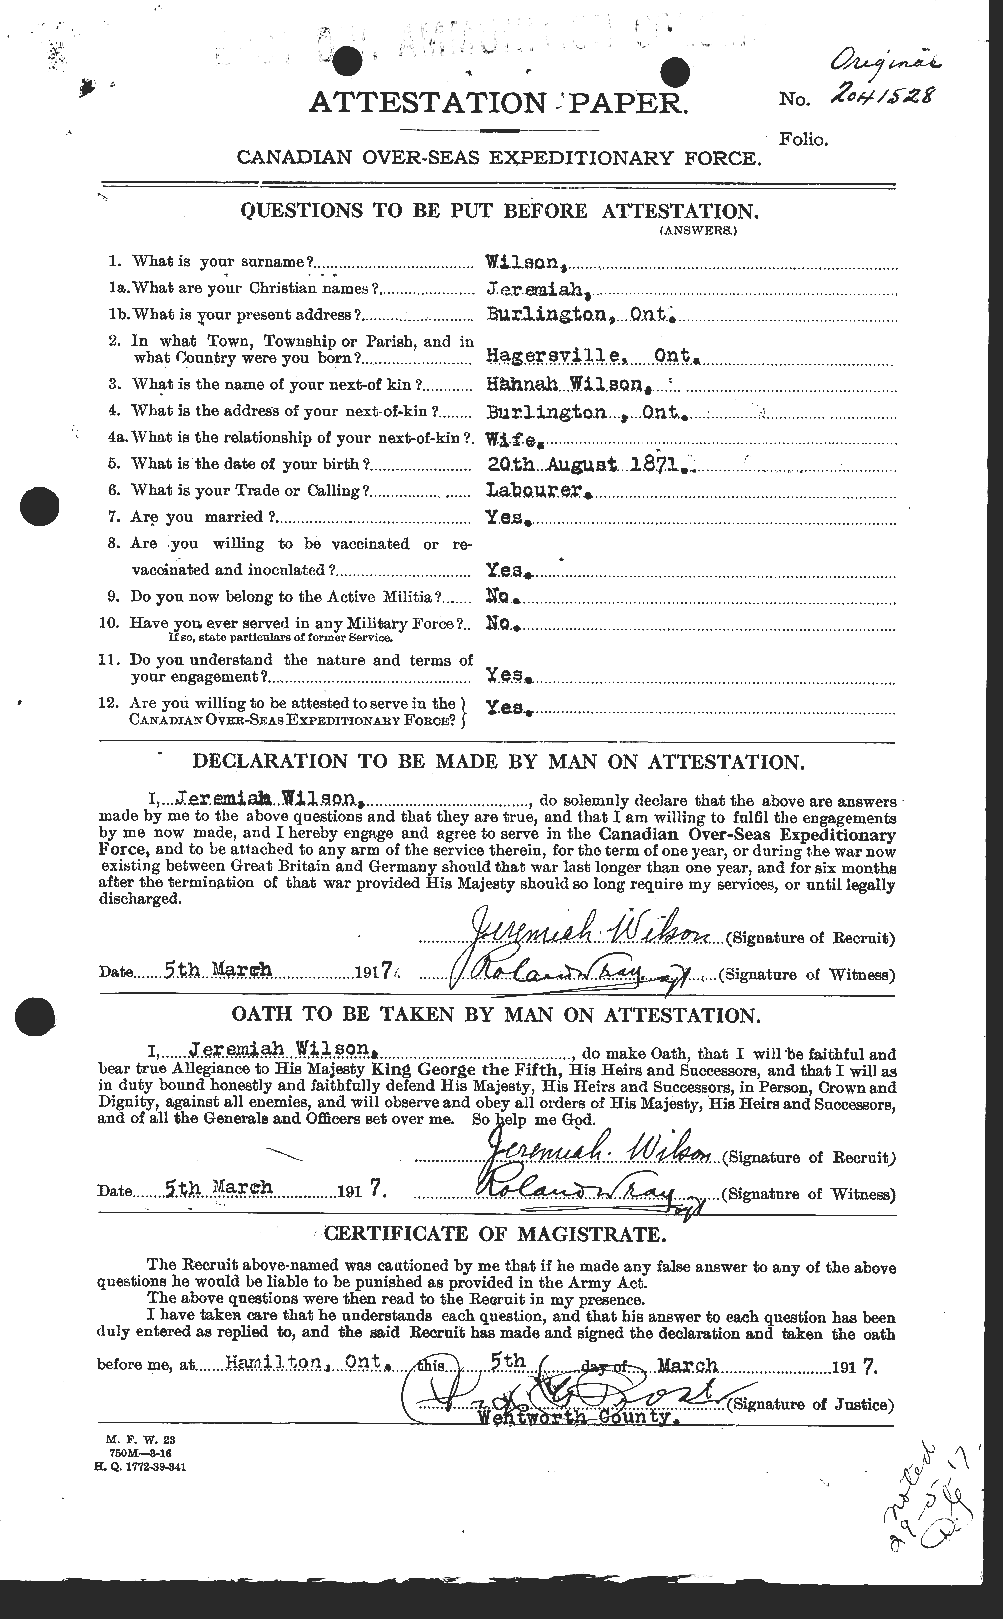 Personnel Records of the First World War - CEF 681521a